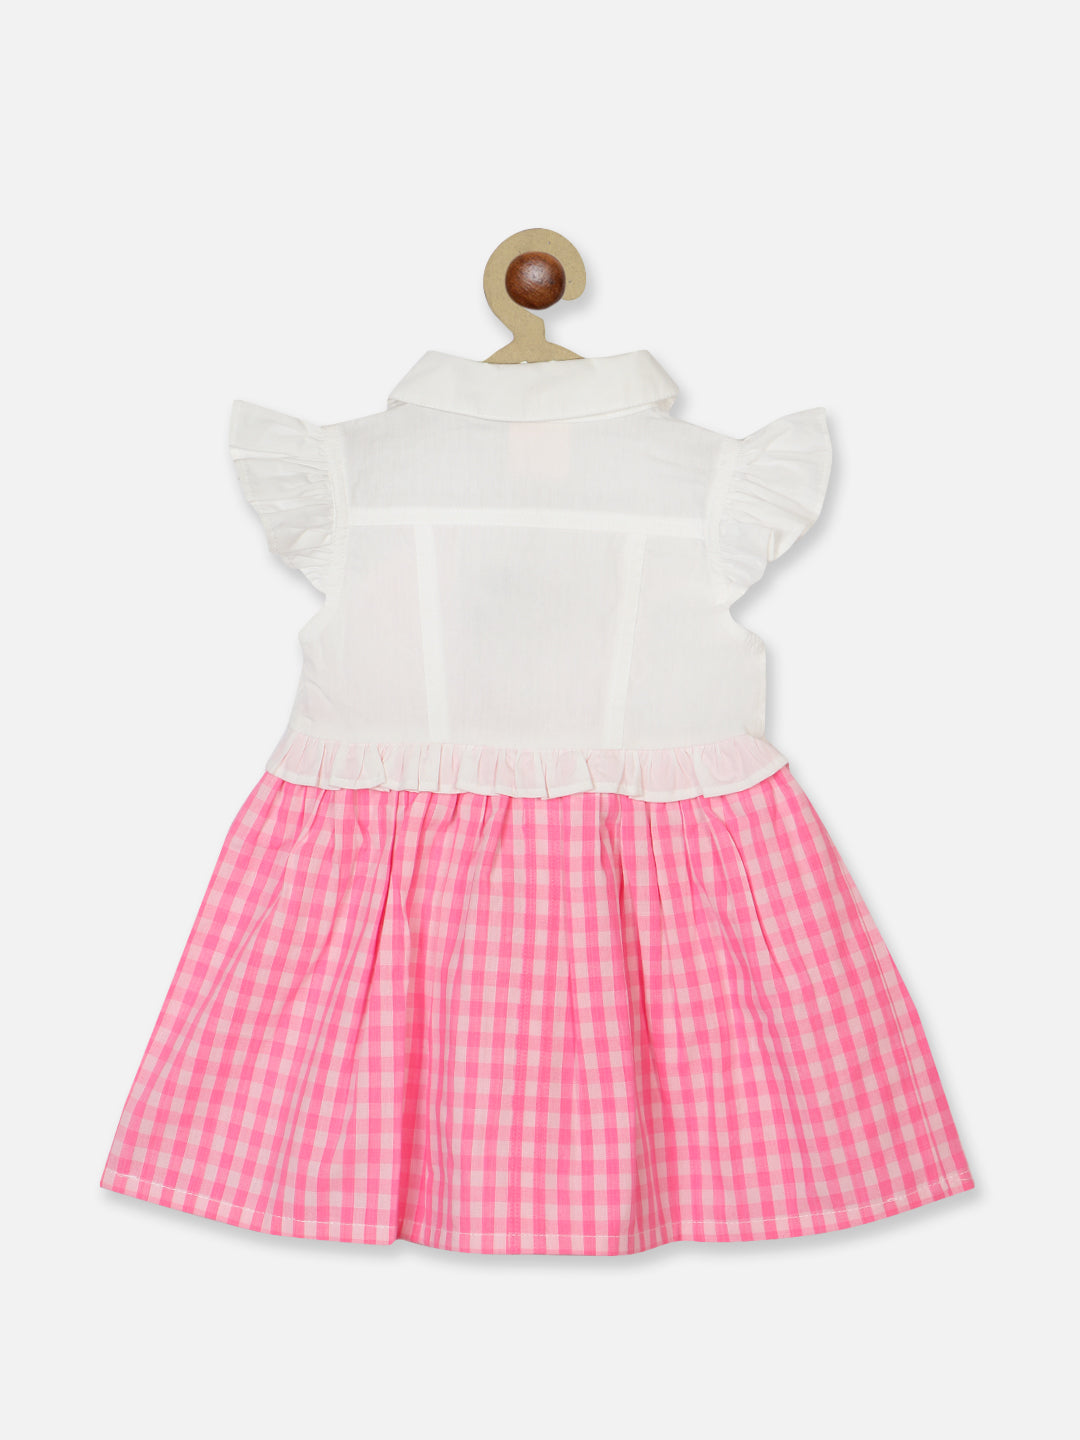 Nautinati Infants Checked Peter Pan Collar Ruffled Detailed Pure Cotton A-Line Dress